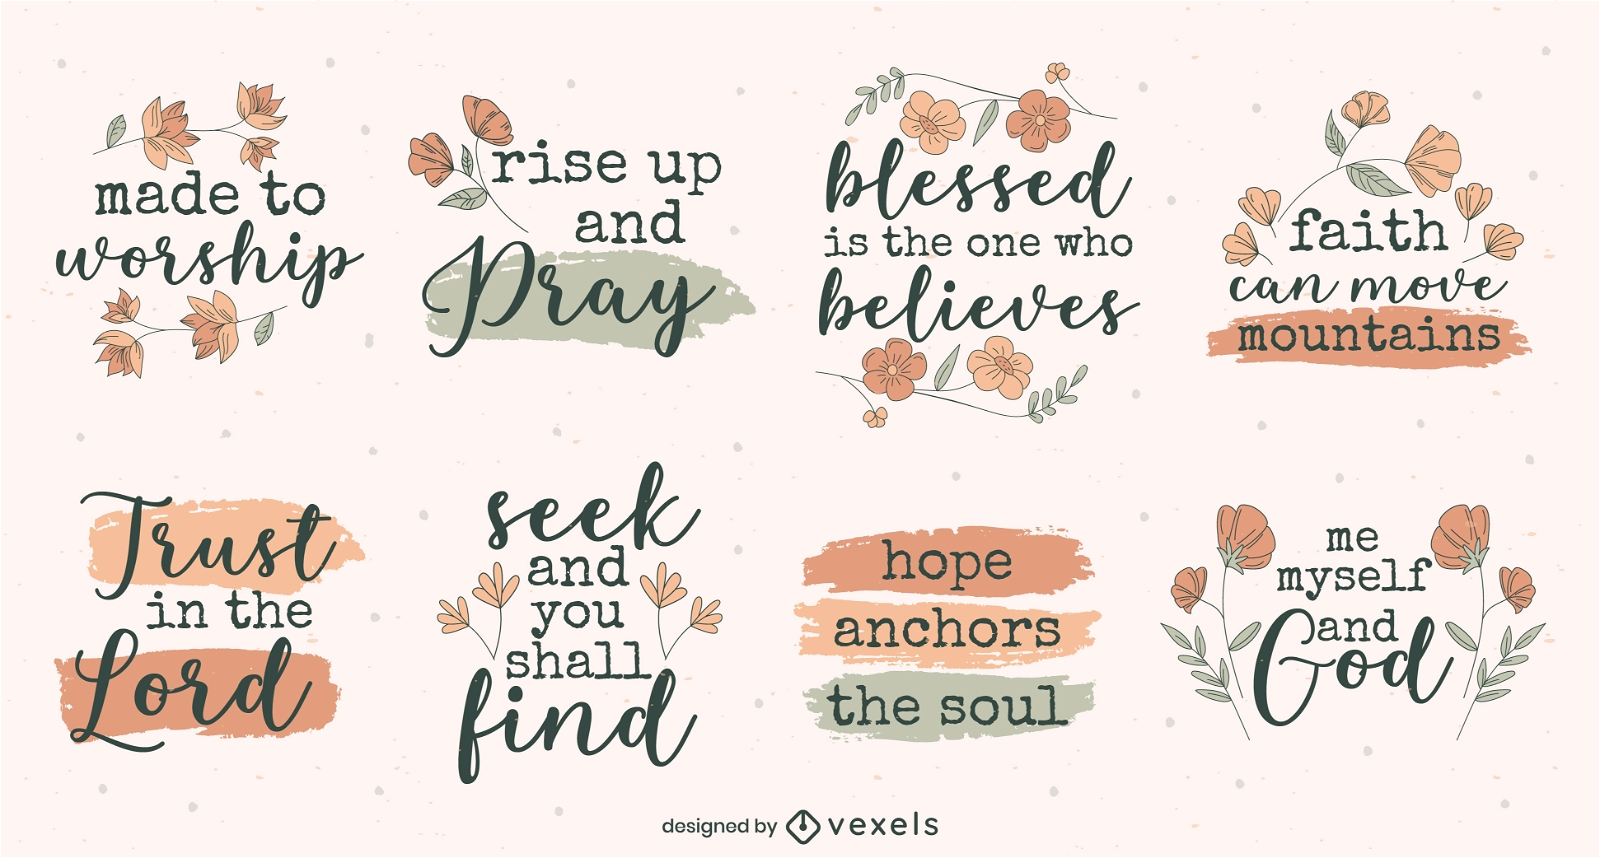 Religion quotes and flowers stickers set